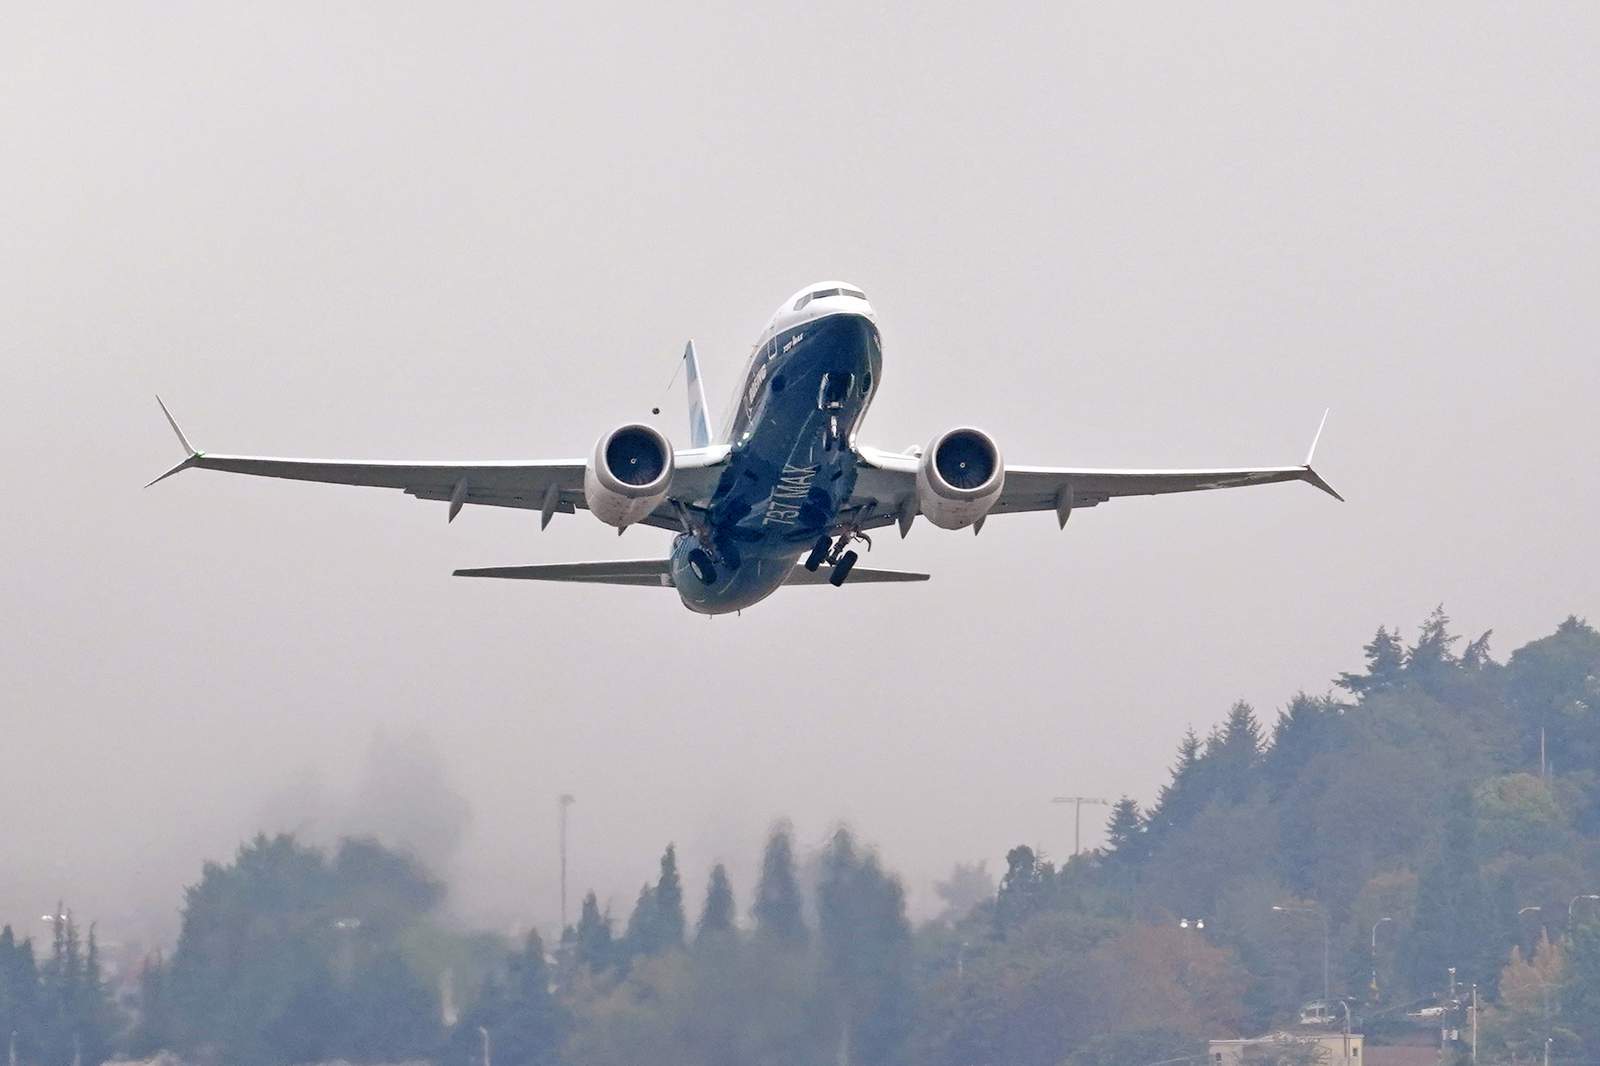 Boeing will pay $2.5 billion to settle charge over plane